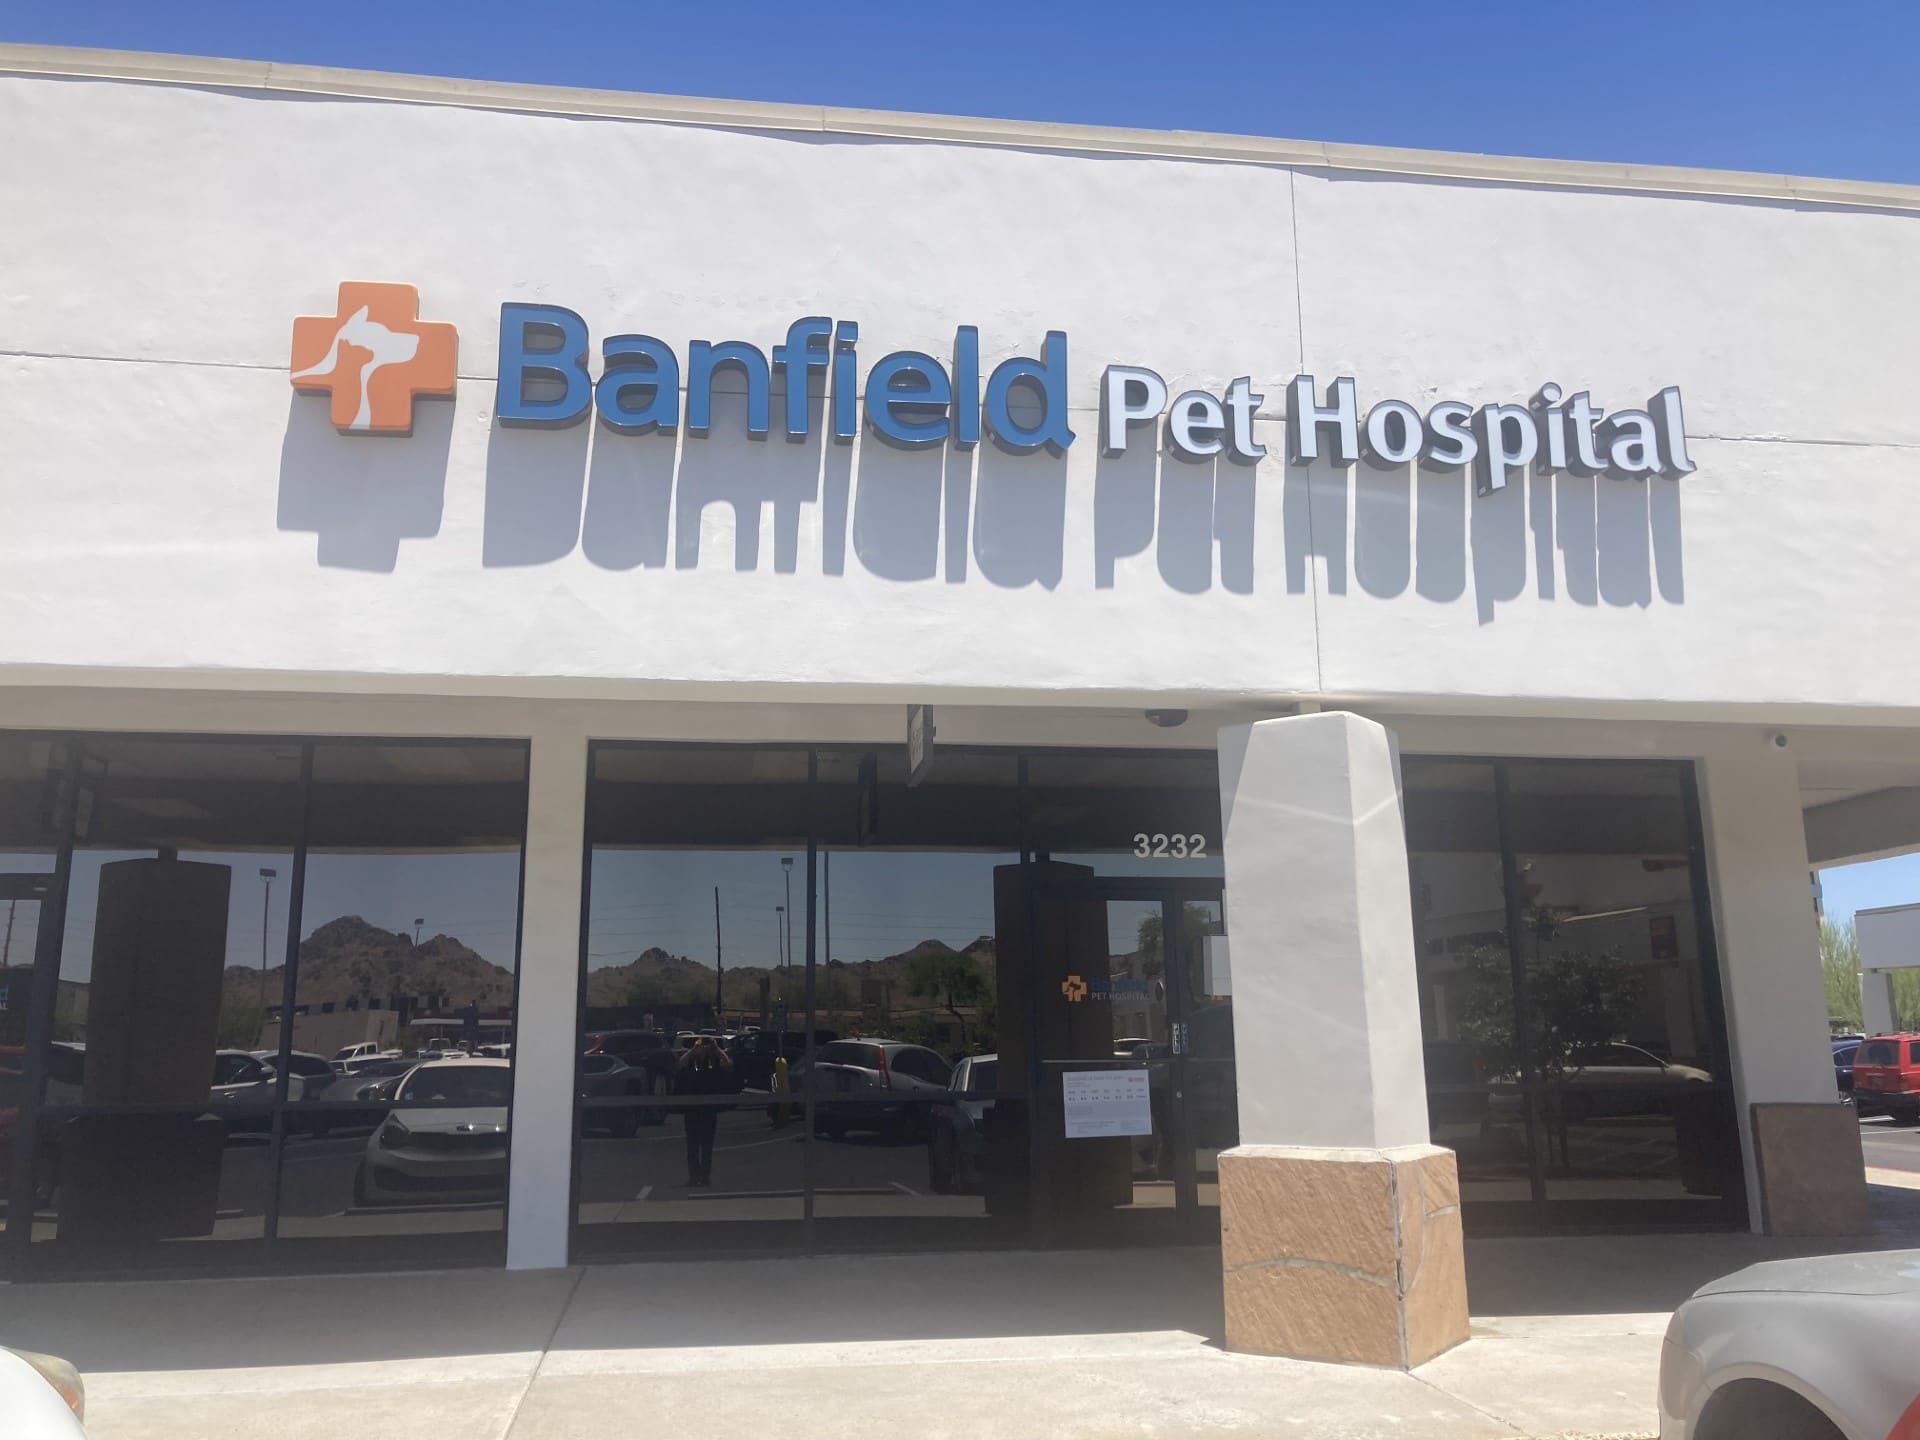 The front door to the Banfield Shea location